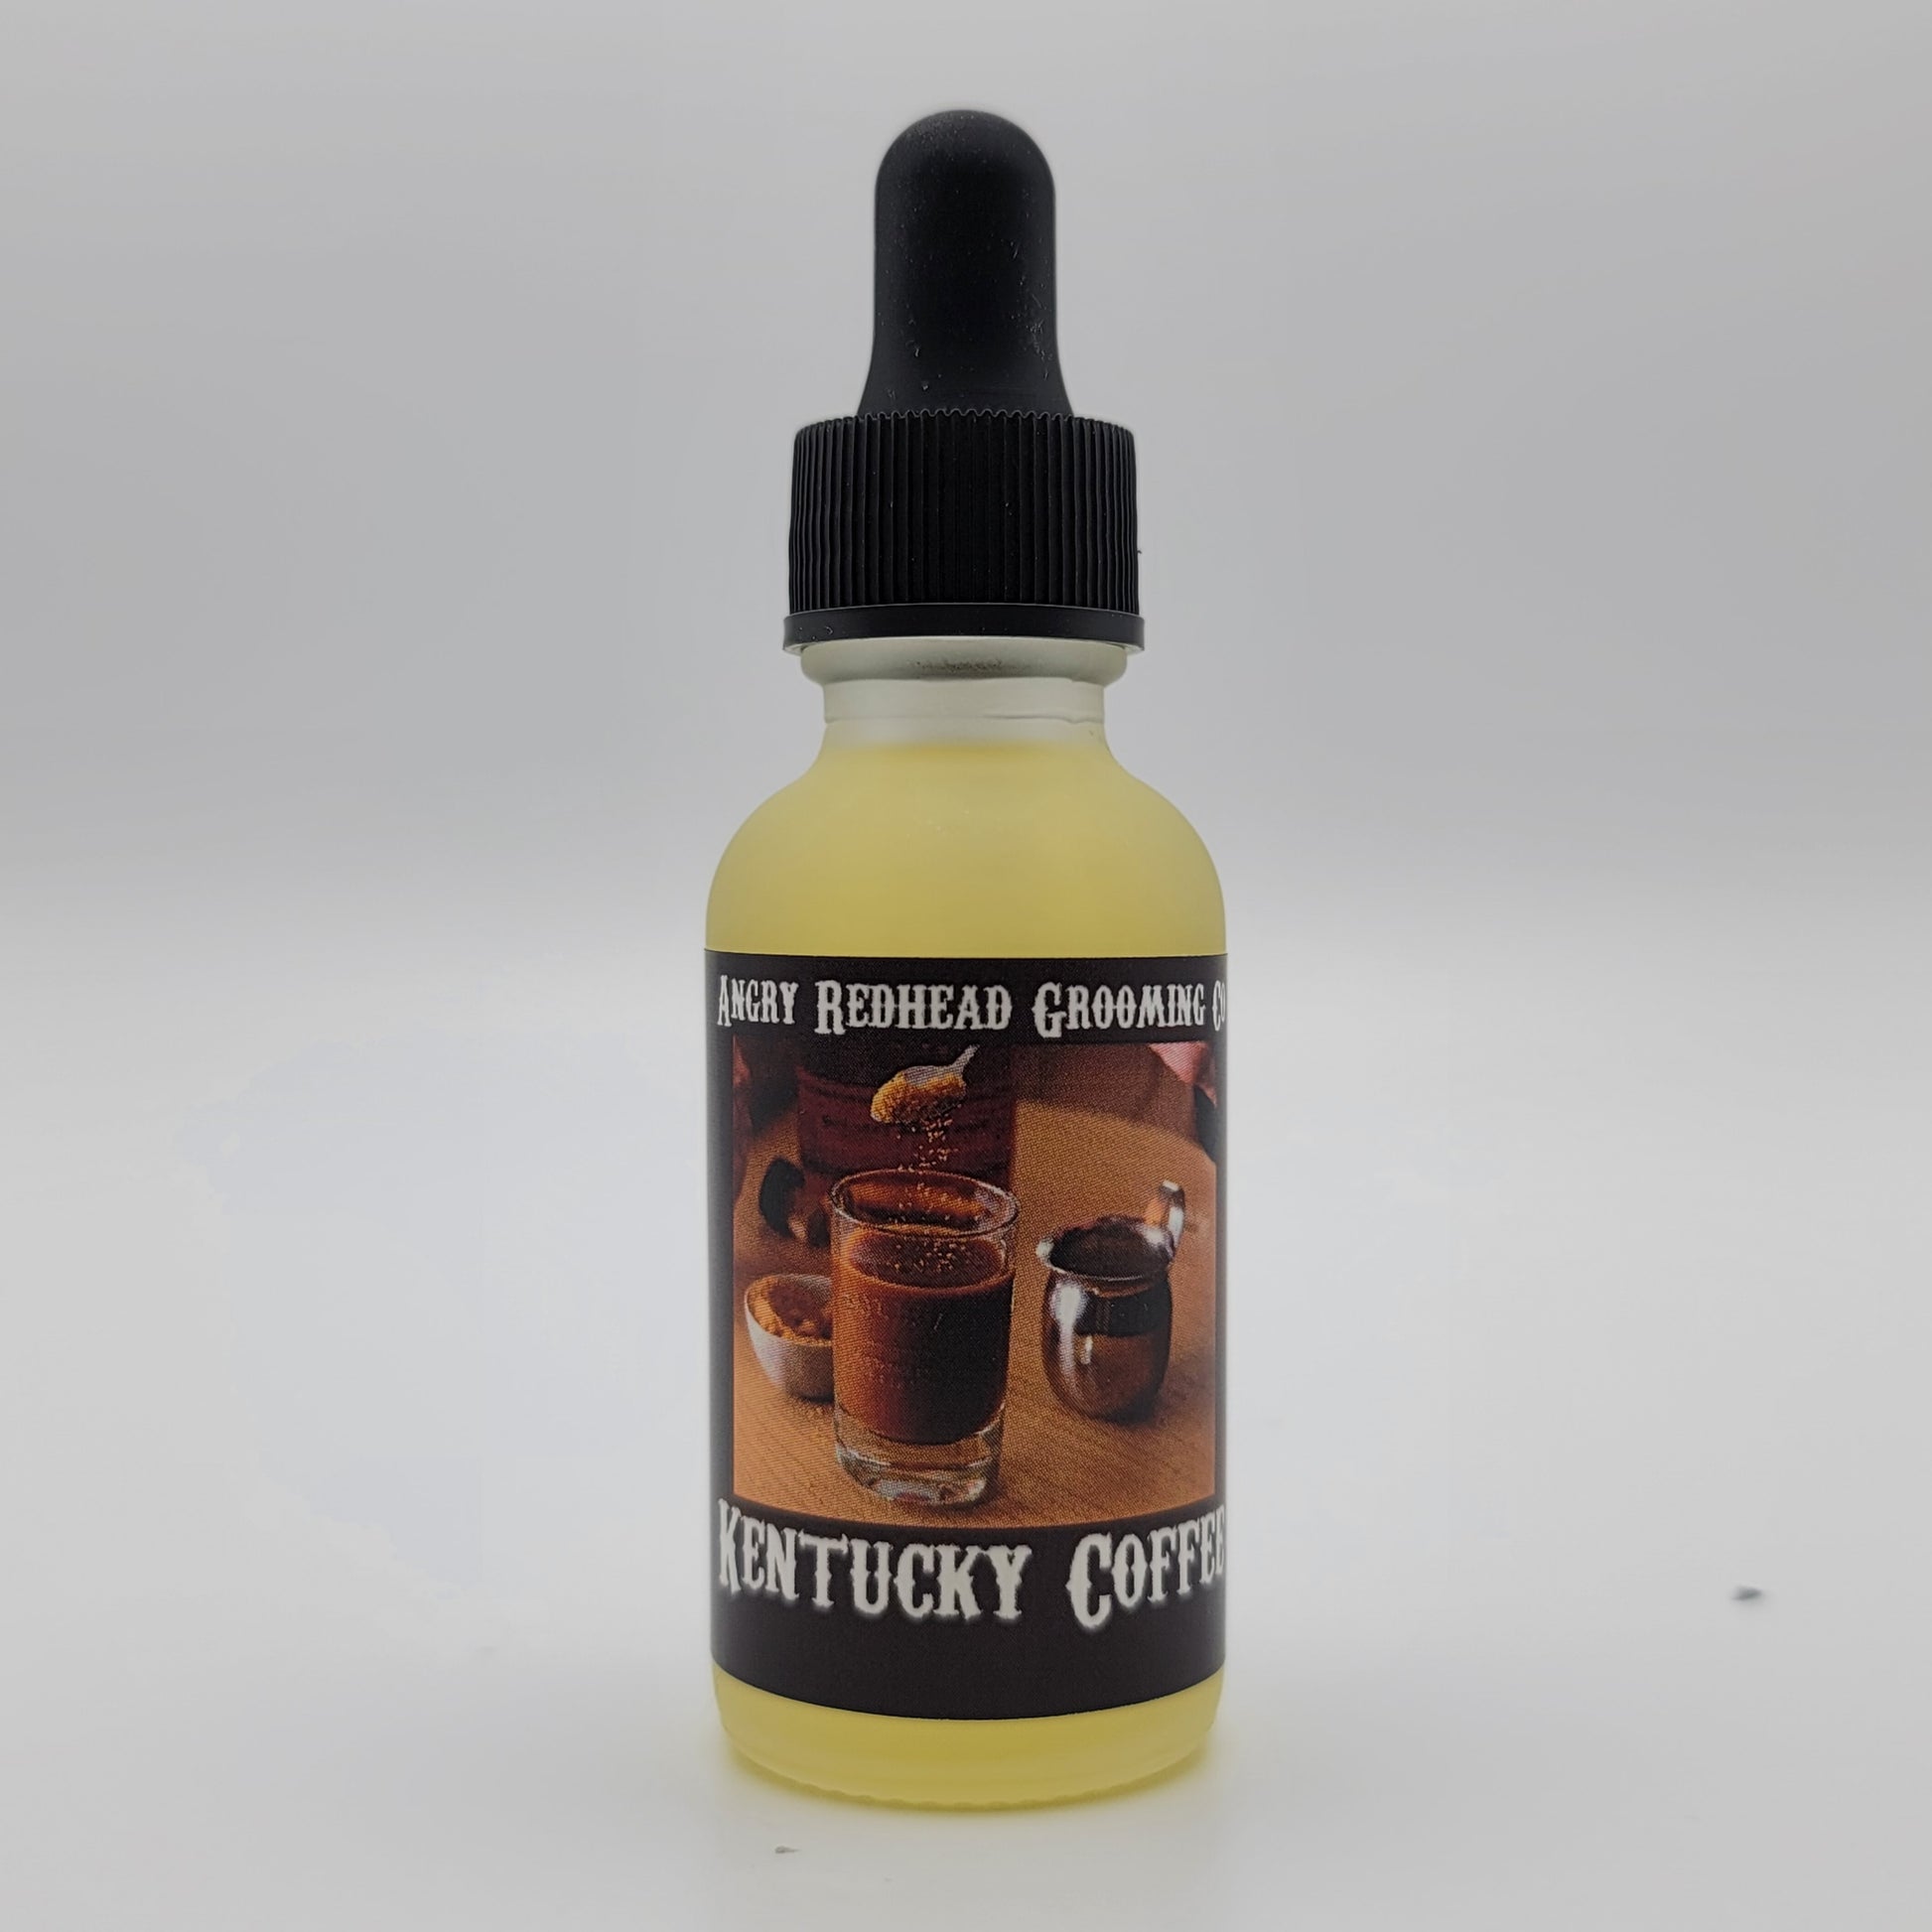 Kentucky Coffee Pre-Shave Oil by Angry Redhead Grooming Co - angryredheadgrooming.com